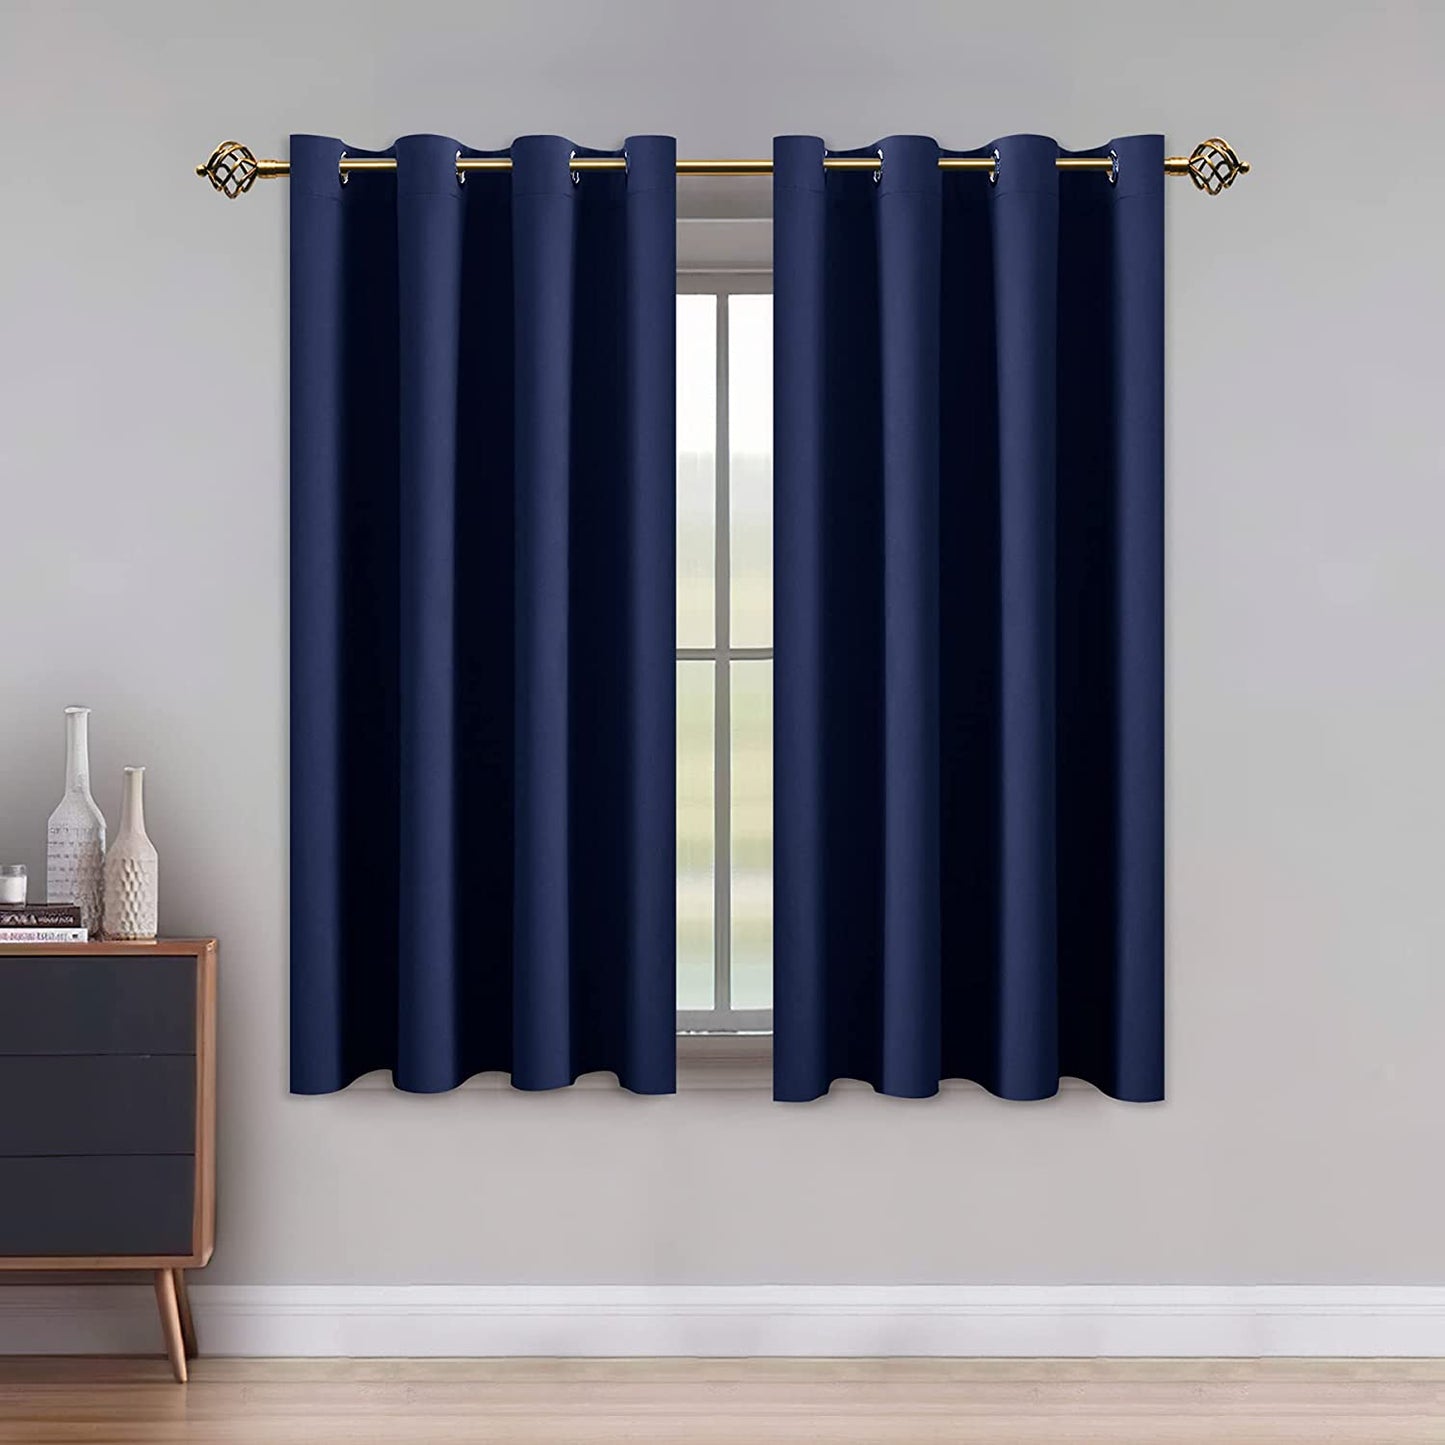 LUSHLEAF Blackout Curtains for Bedroom, Solid Thermal Insulated with Grommet Noise Reduction Window Drapes, Room Darkening Curtains for Living Room, 2 Panels, 52 X 63 Inch Grey  SHEEROOM Navy 52 X 45 Inch 